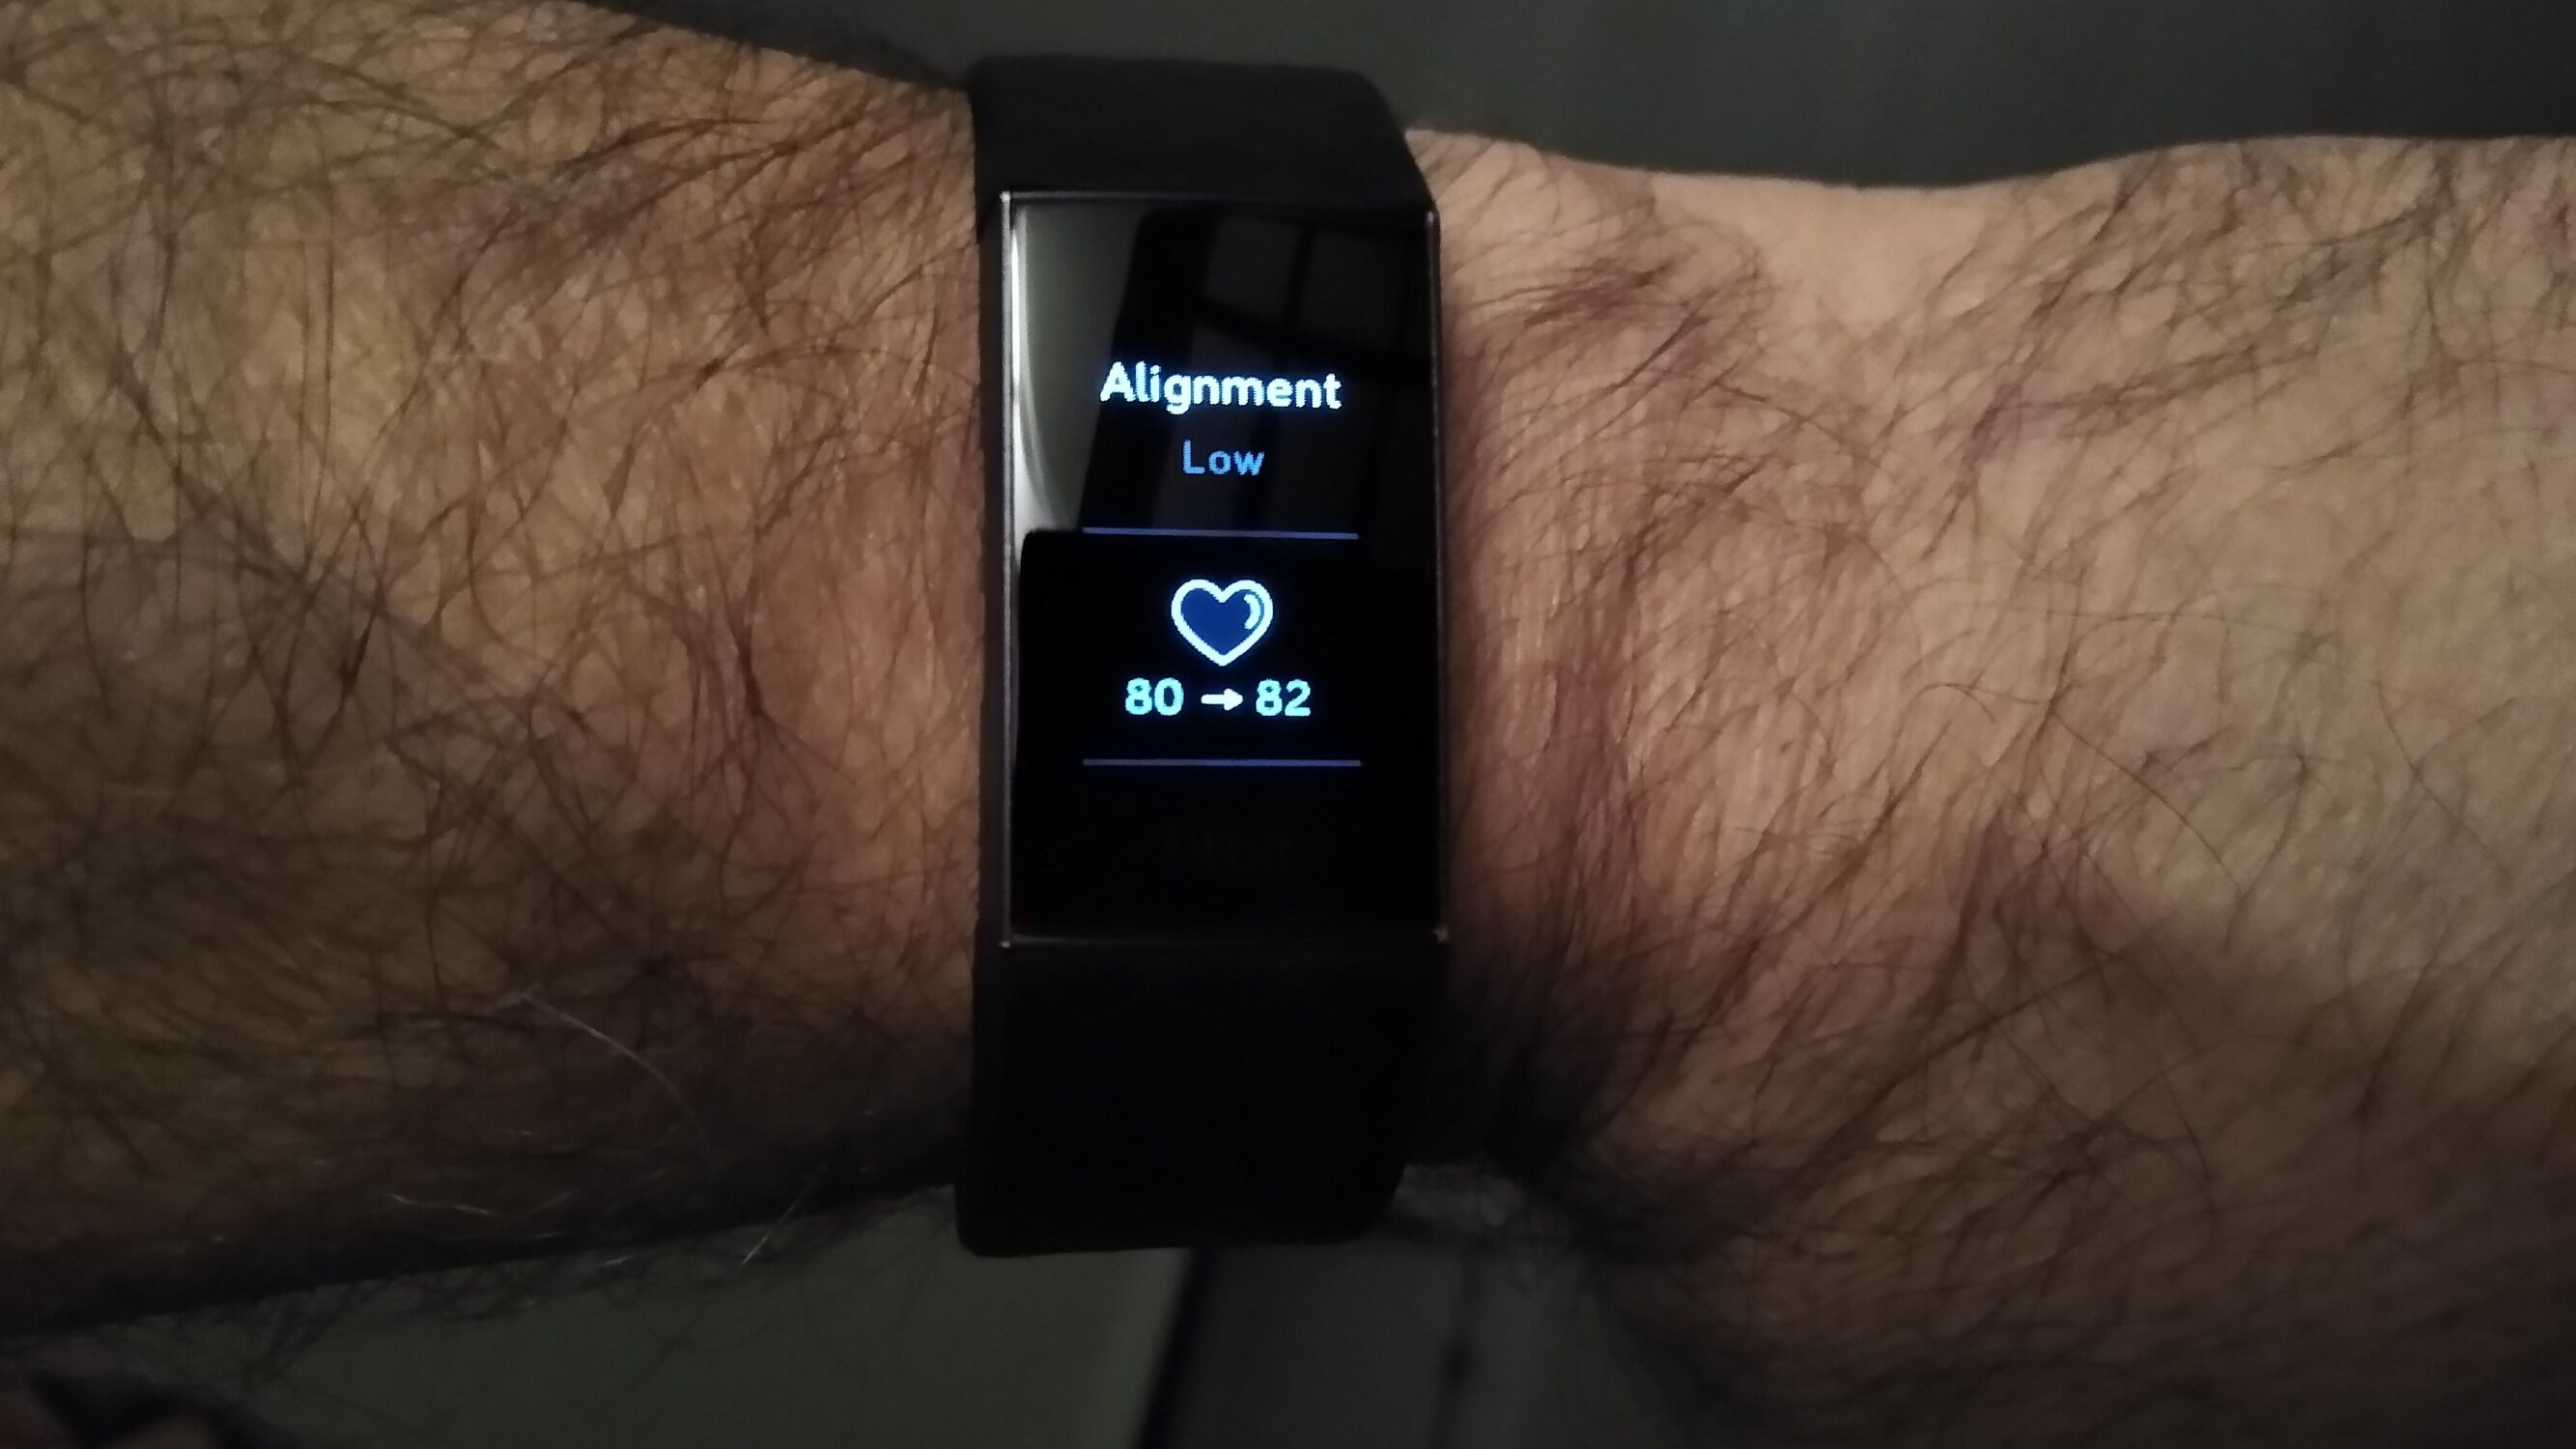 Fitbit Alignment Alerts: Understanding What “Low Alignment” Means